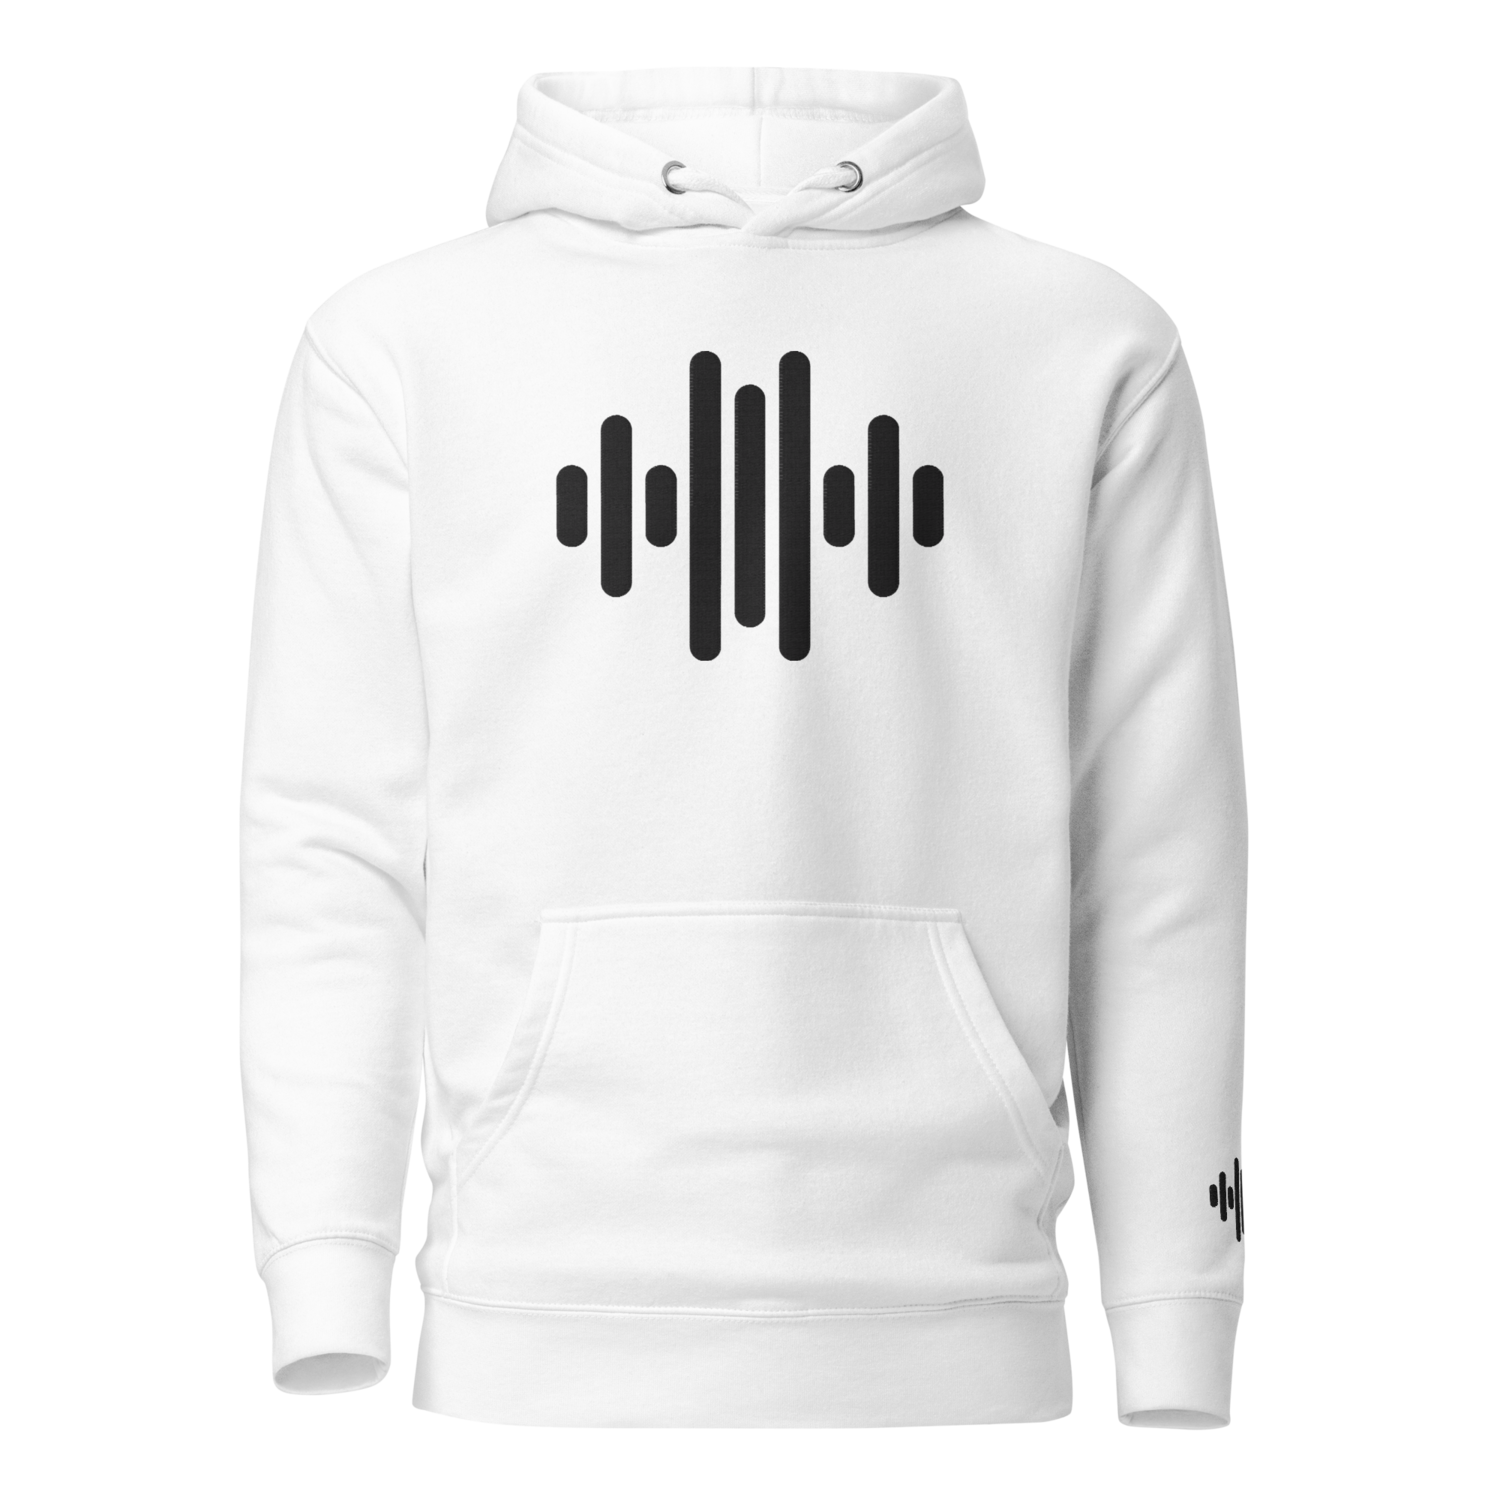 A311 Soundwave Series Embroidered Fleece Hoodie